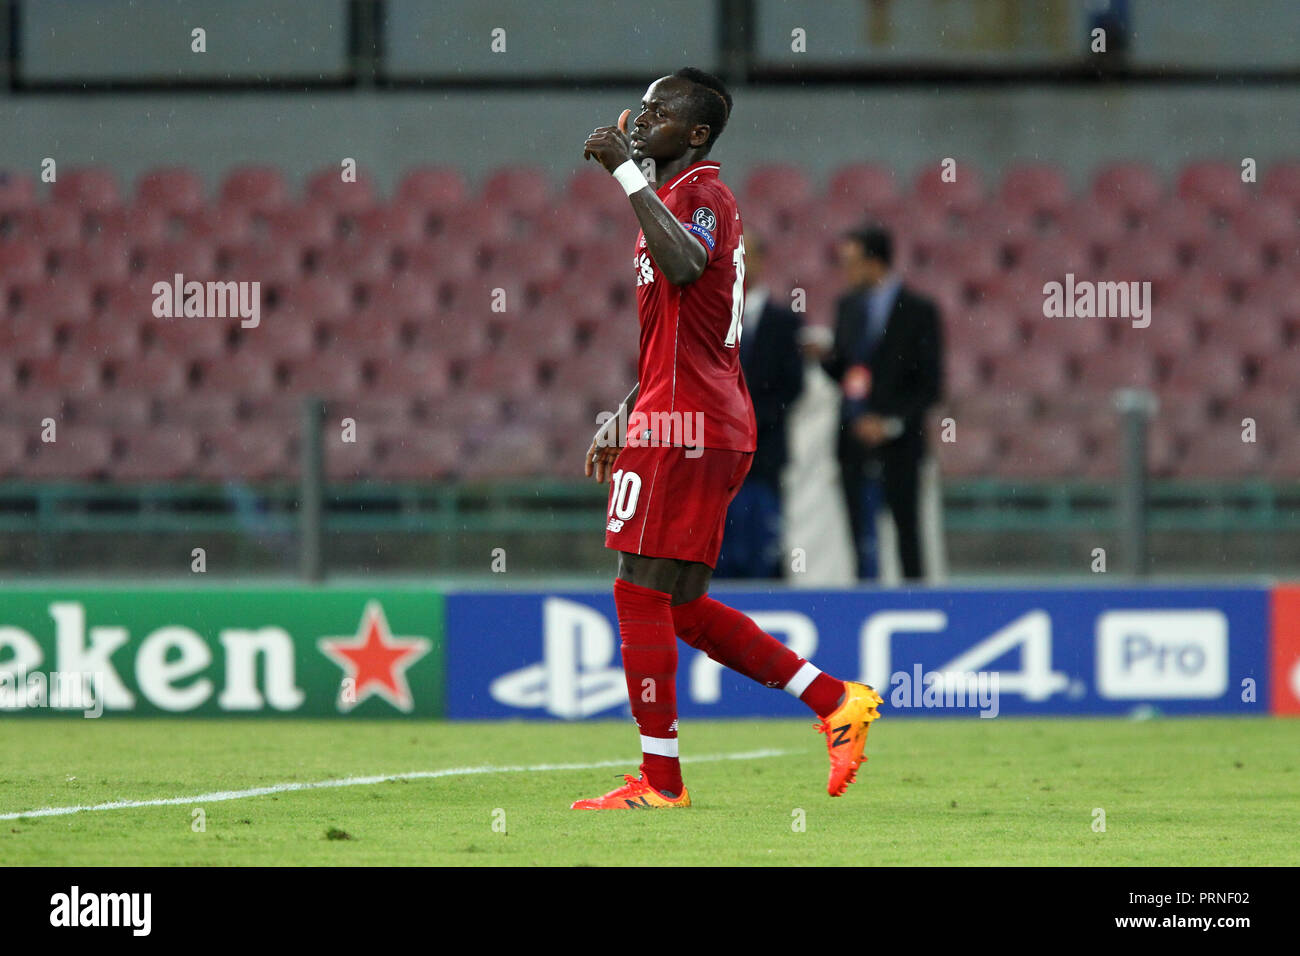 Napoli, Italy. 03th October 2018. Sadio Mané  of Liverpool Fc  during the Uefa Champions League Group C match between Ssc Napoli and Liverpool Fc. Credit: Marco Canoniero/Alamy Live News Stock Photo